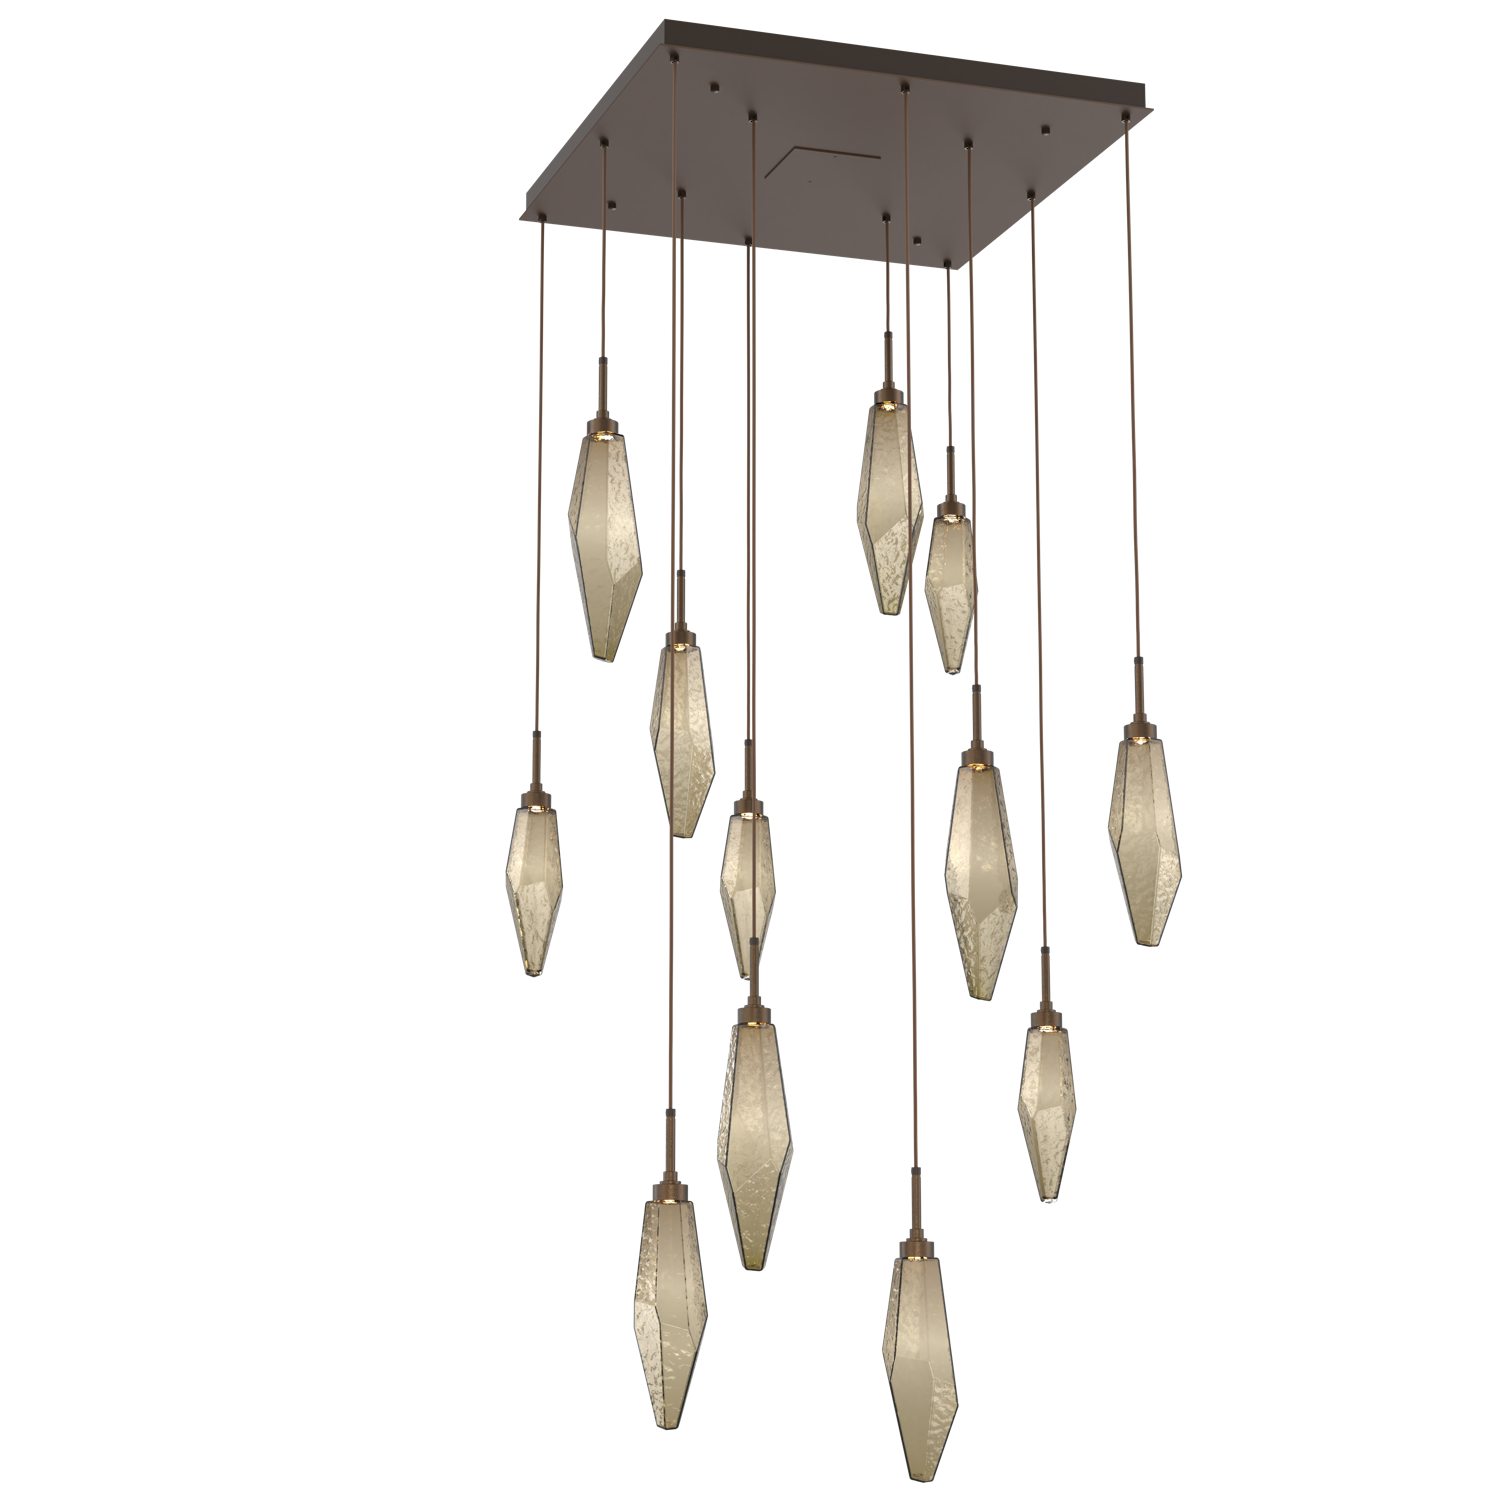 CHB0050-12-FB-CB-Hammerton-Studio-Rock-Crystal-12-light-square-pendant-chandelier-with-flat-bronze-finish-and-chilled-bronze-blown-glass-shades-and-LED-lamping